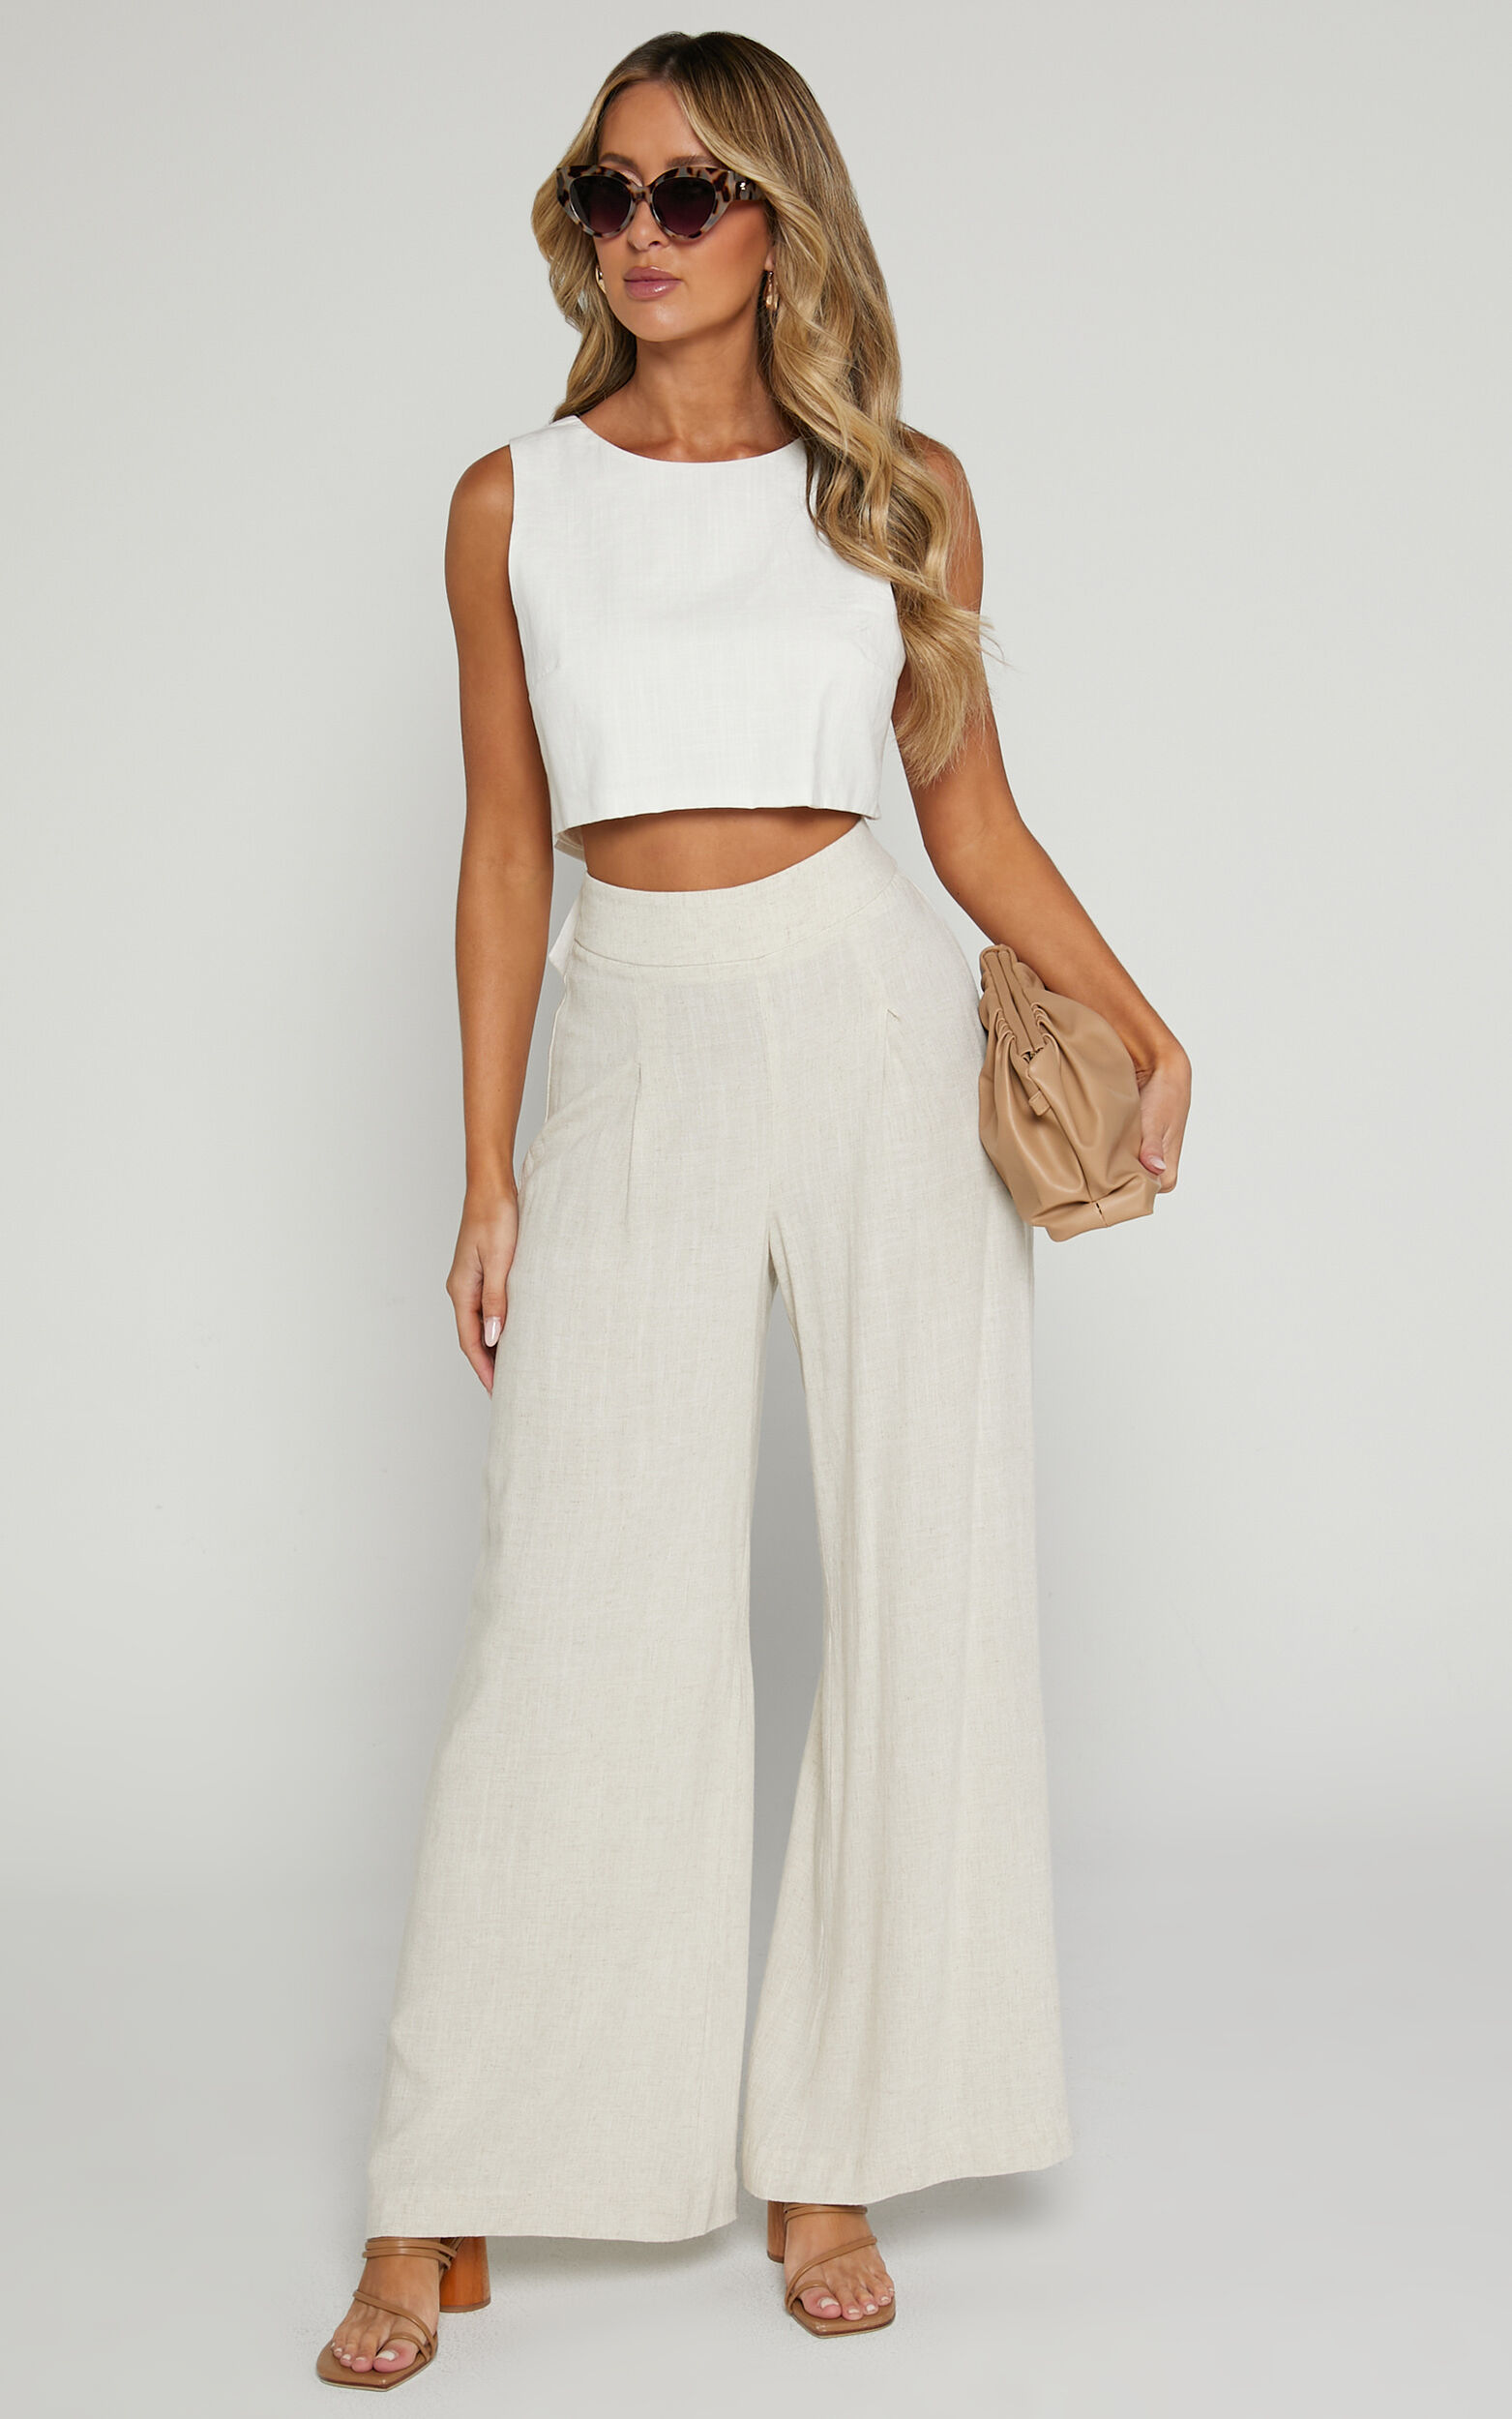 Alina Pants - Linen Look High Waisted Wide Leg Relaxed Pants in